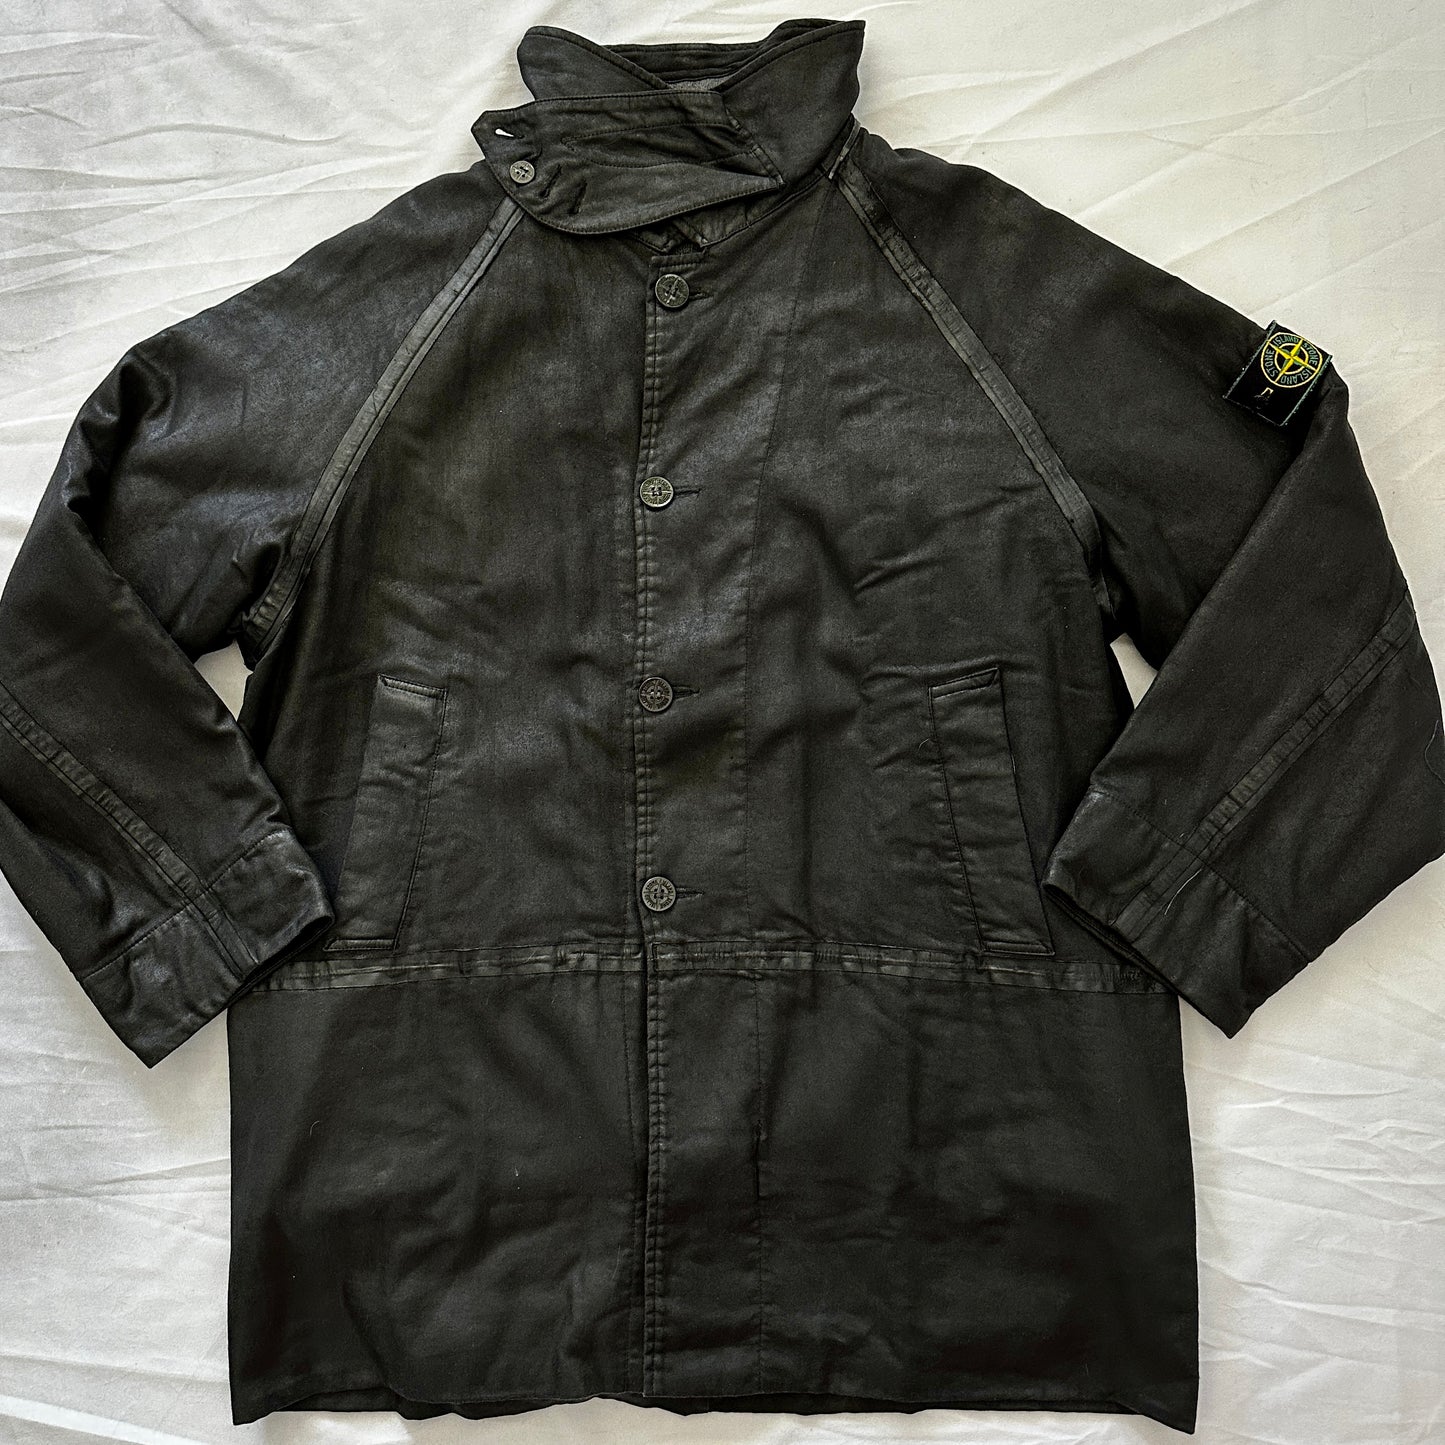 Stone Island Vintage 1996 Dutch Rope Lining Jacket - XL - Made in Italy